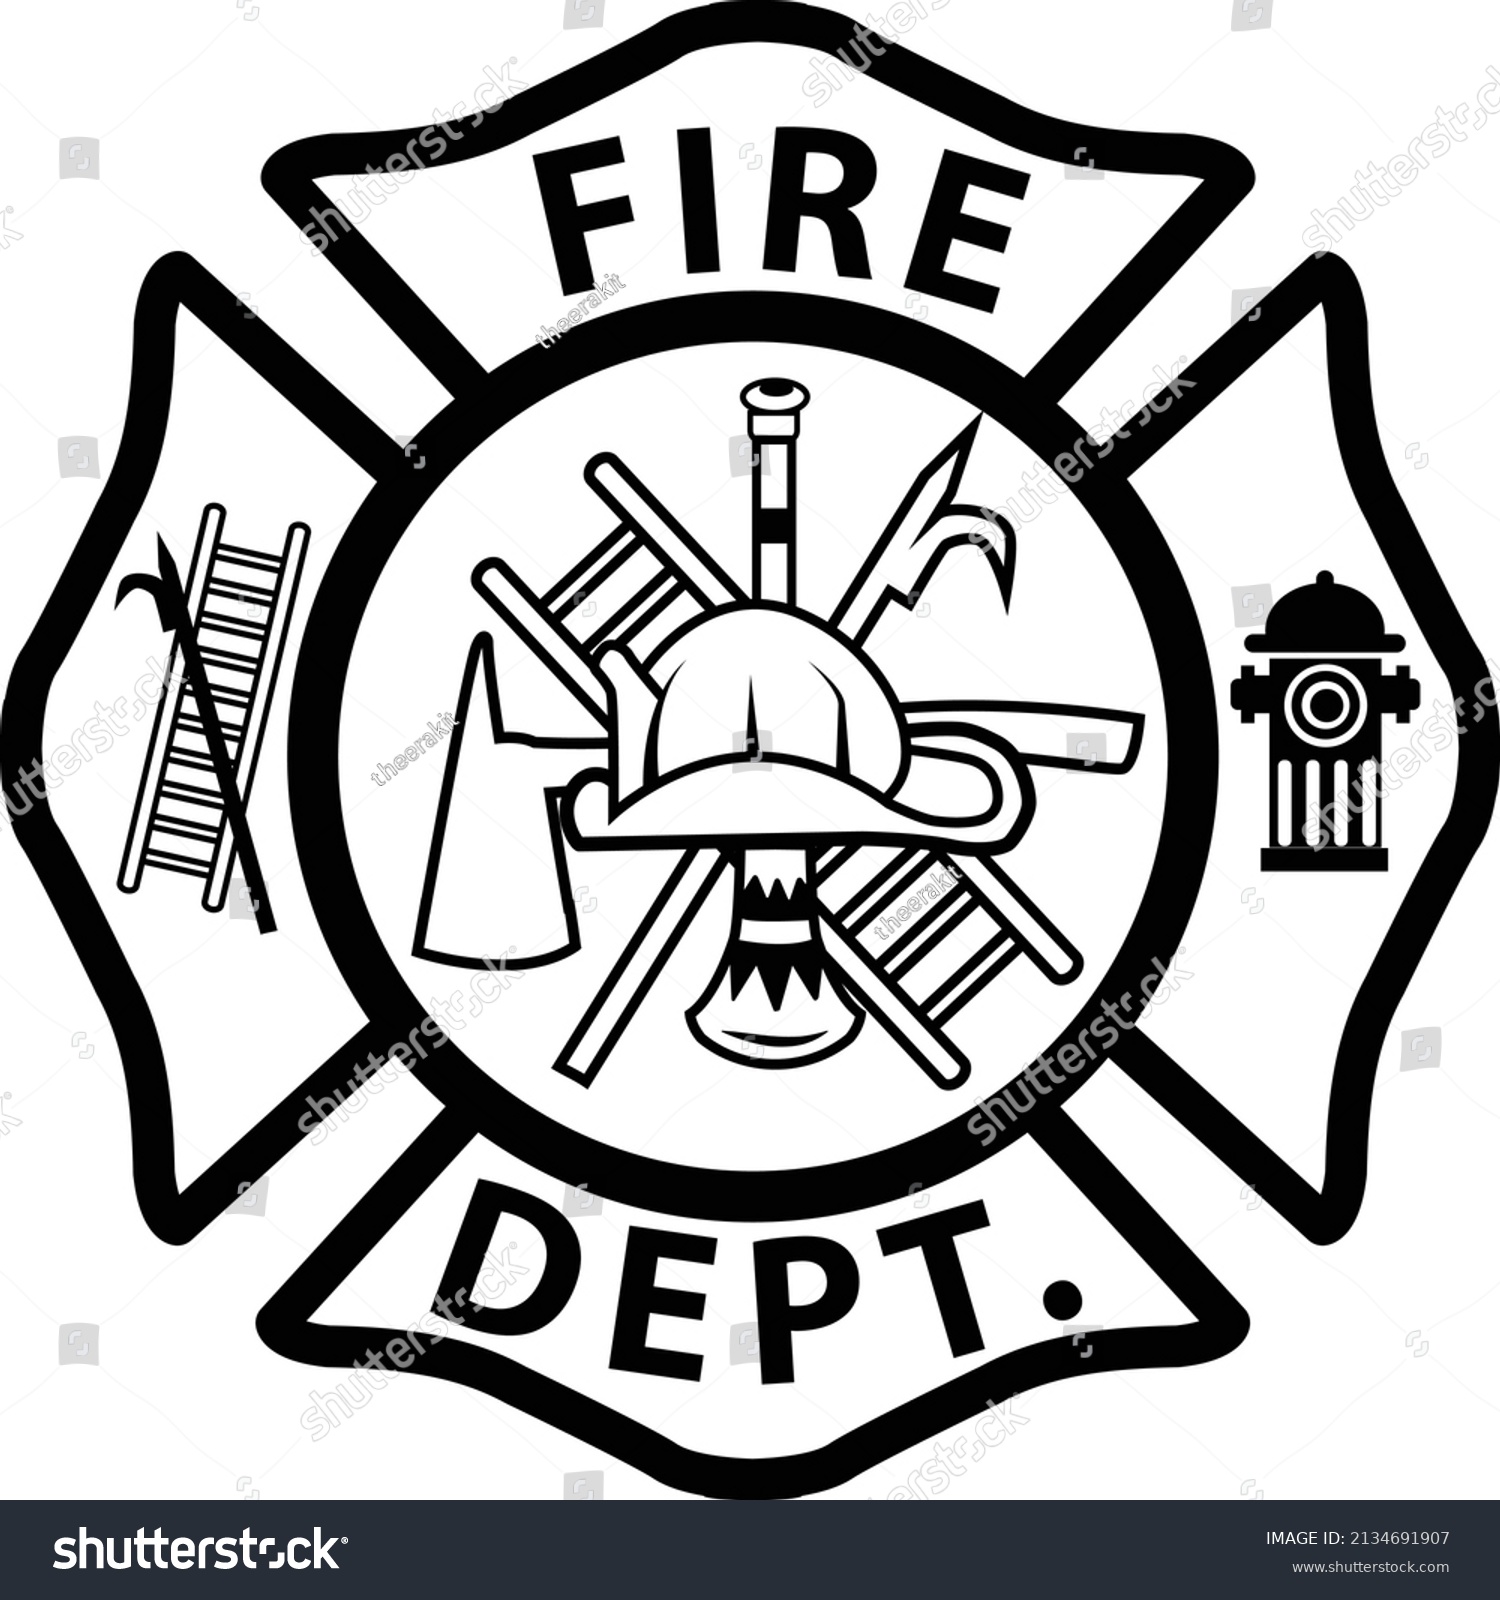 716 Firefighters maltese cross Images, Stock Photos & Vectors ...